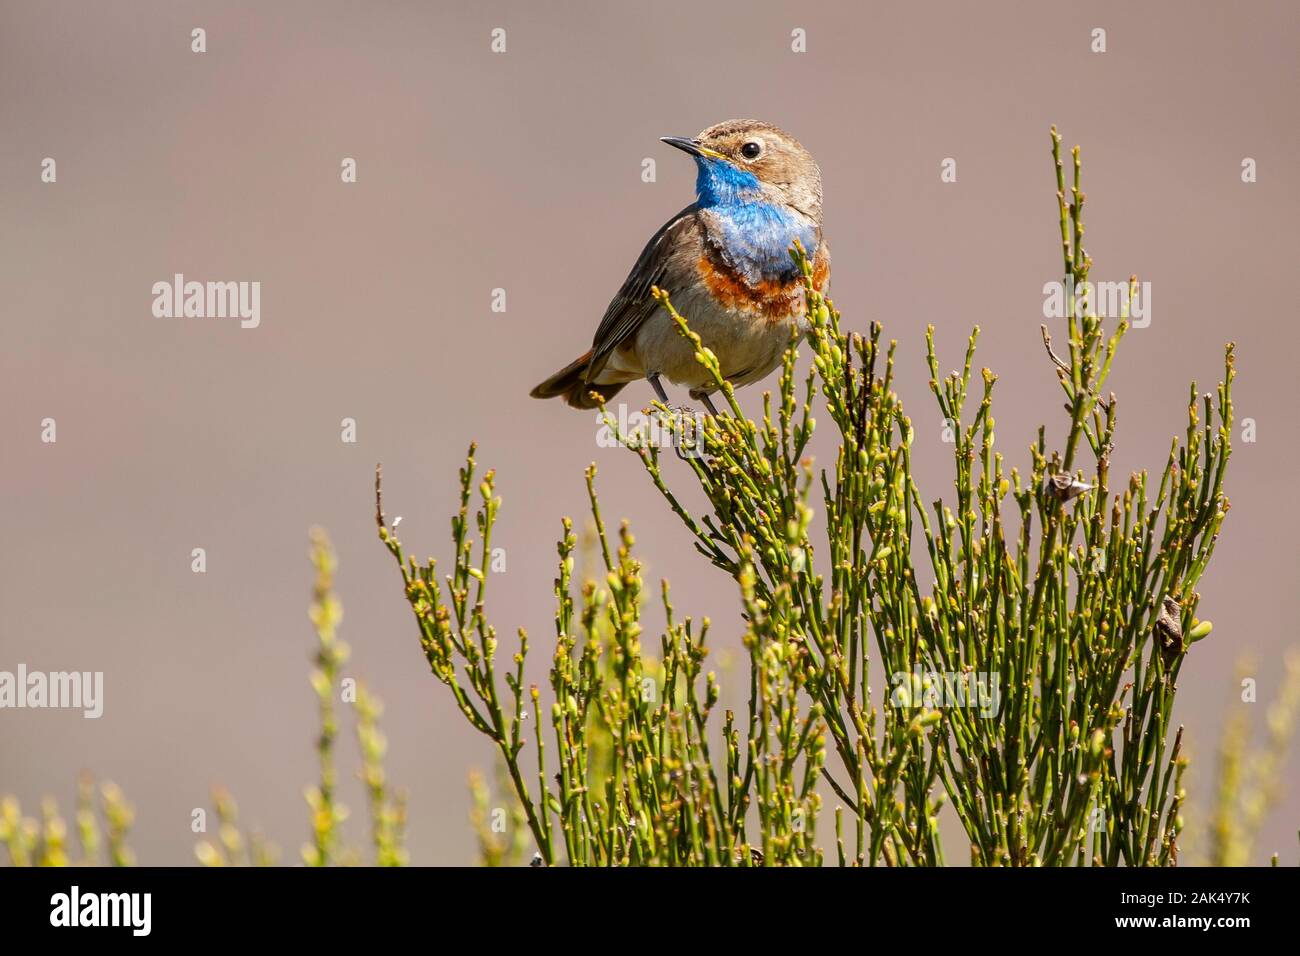 White-spotted bluethroat (Luscinia svecica cyanecula) singing in the Cantabrian mountain range. Leon, Spain. Stock Photo